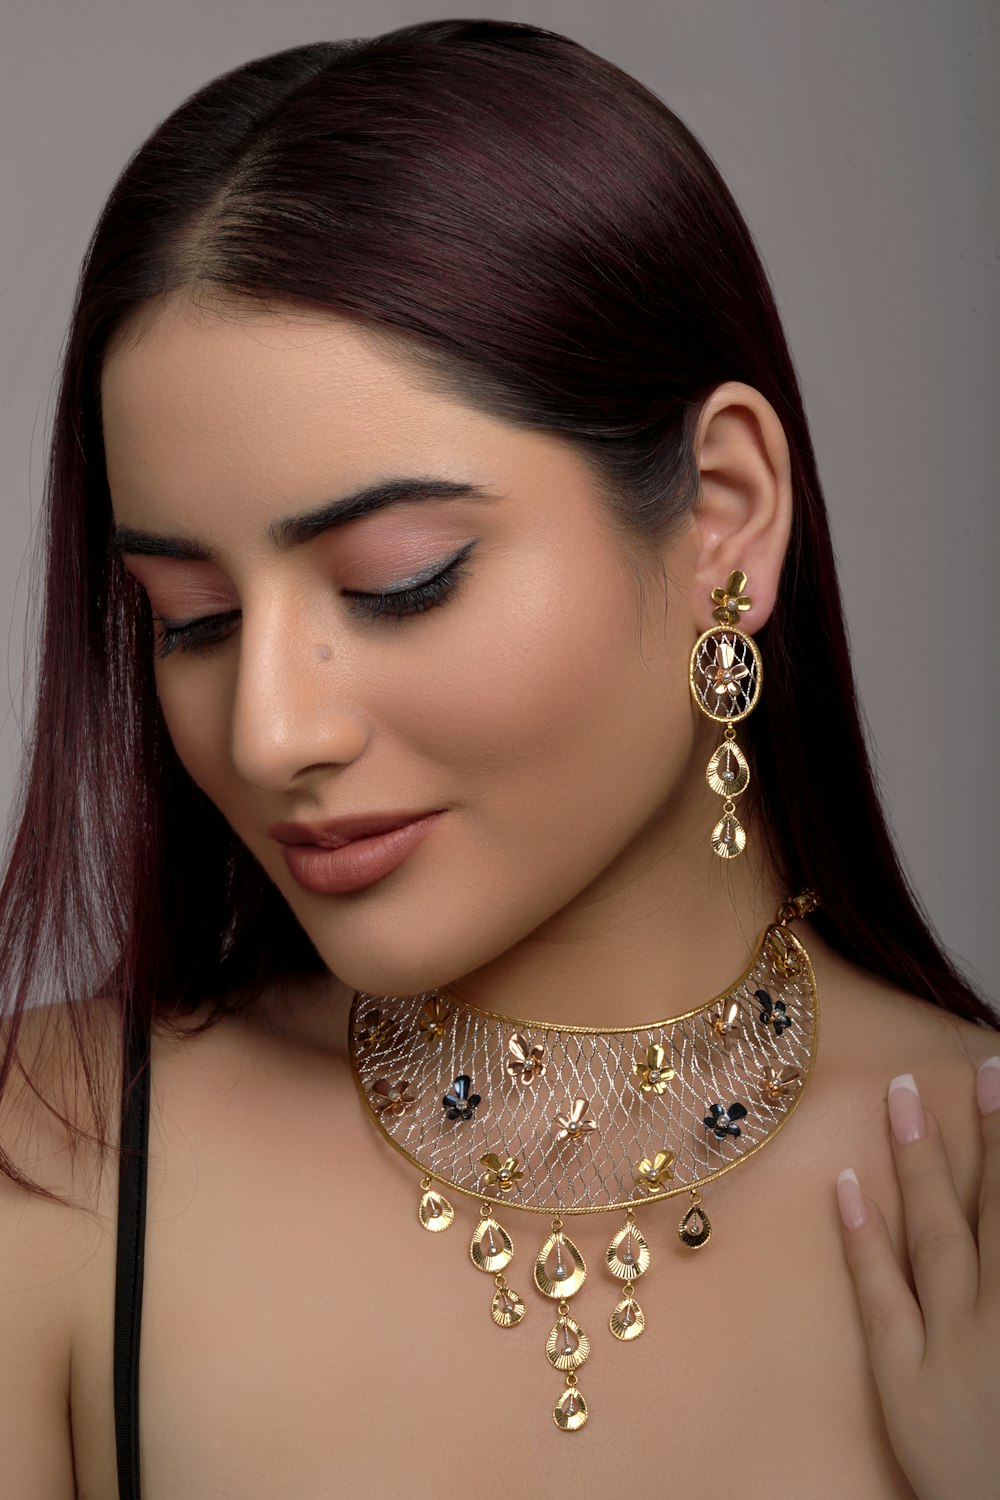 a woman wearing a gold necklace and earrings